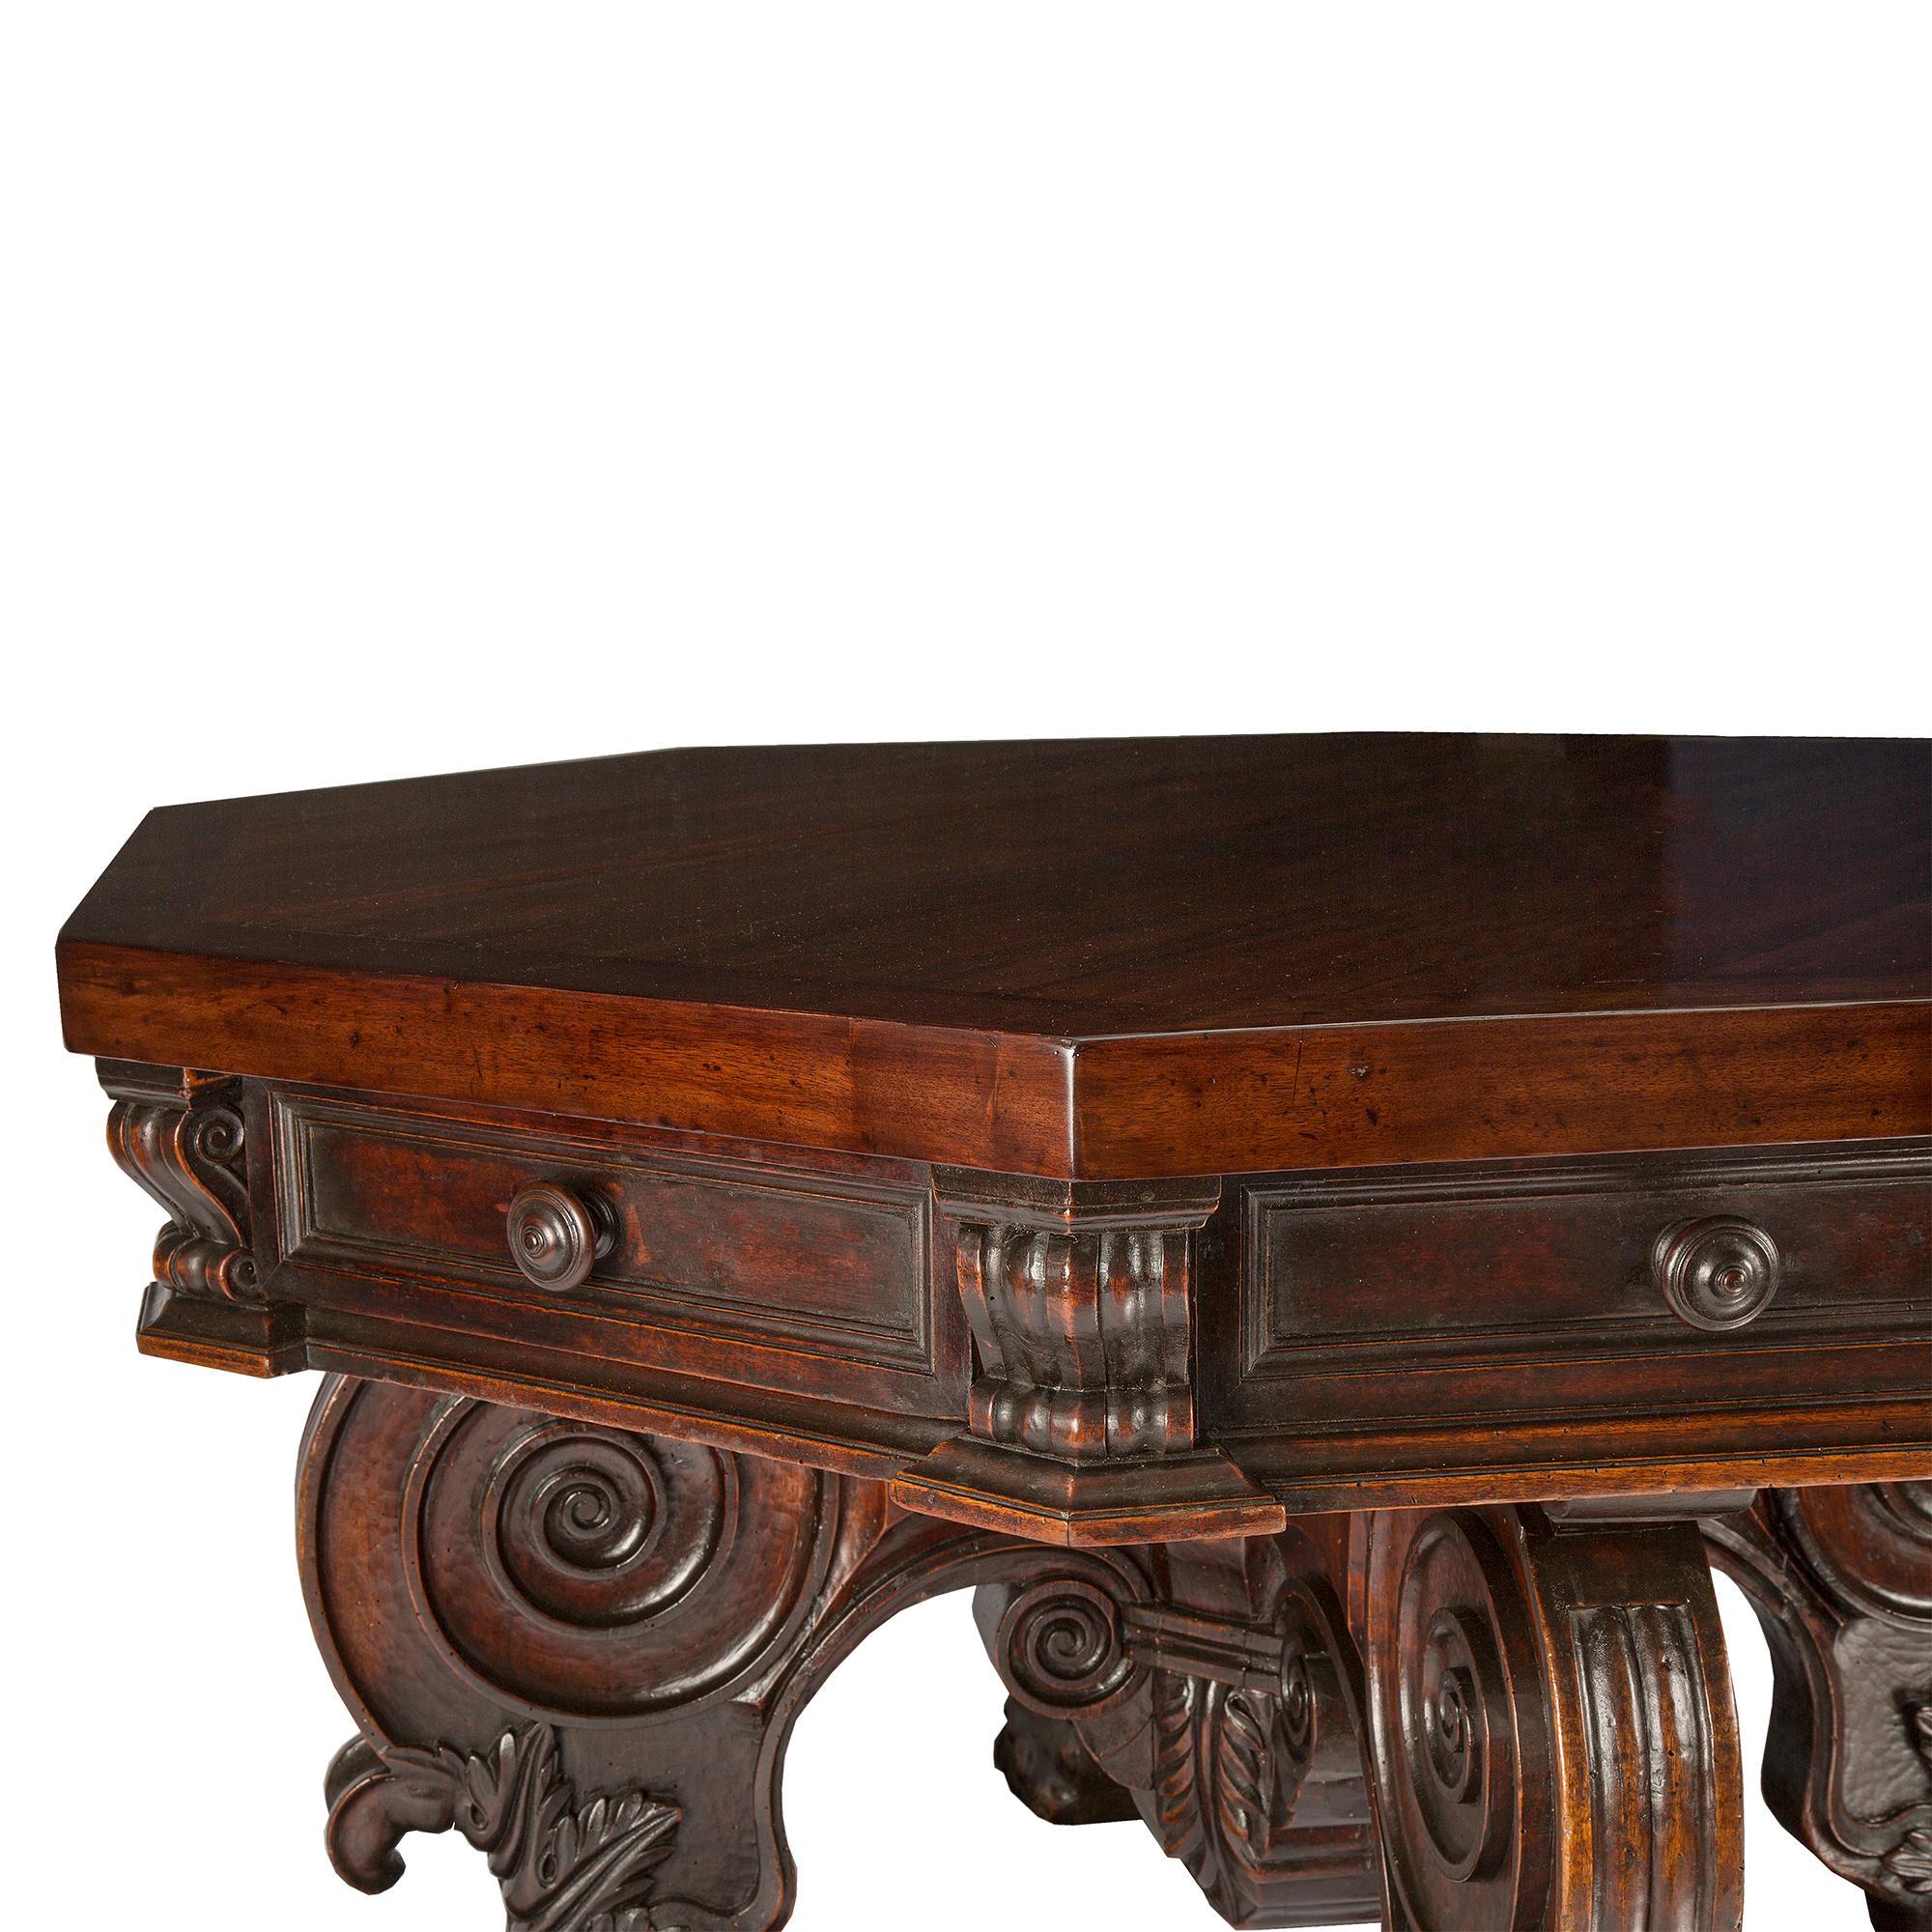 Italian 17th Century Baroque Period Solid Walnut Octagonal Center Table For Sale 2